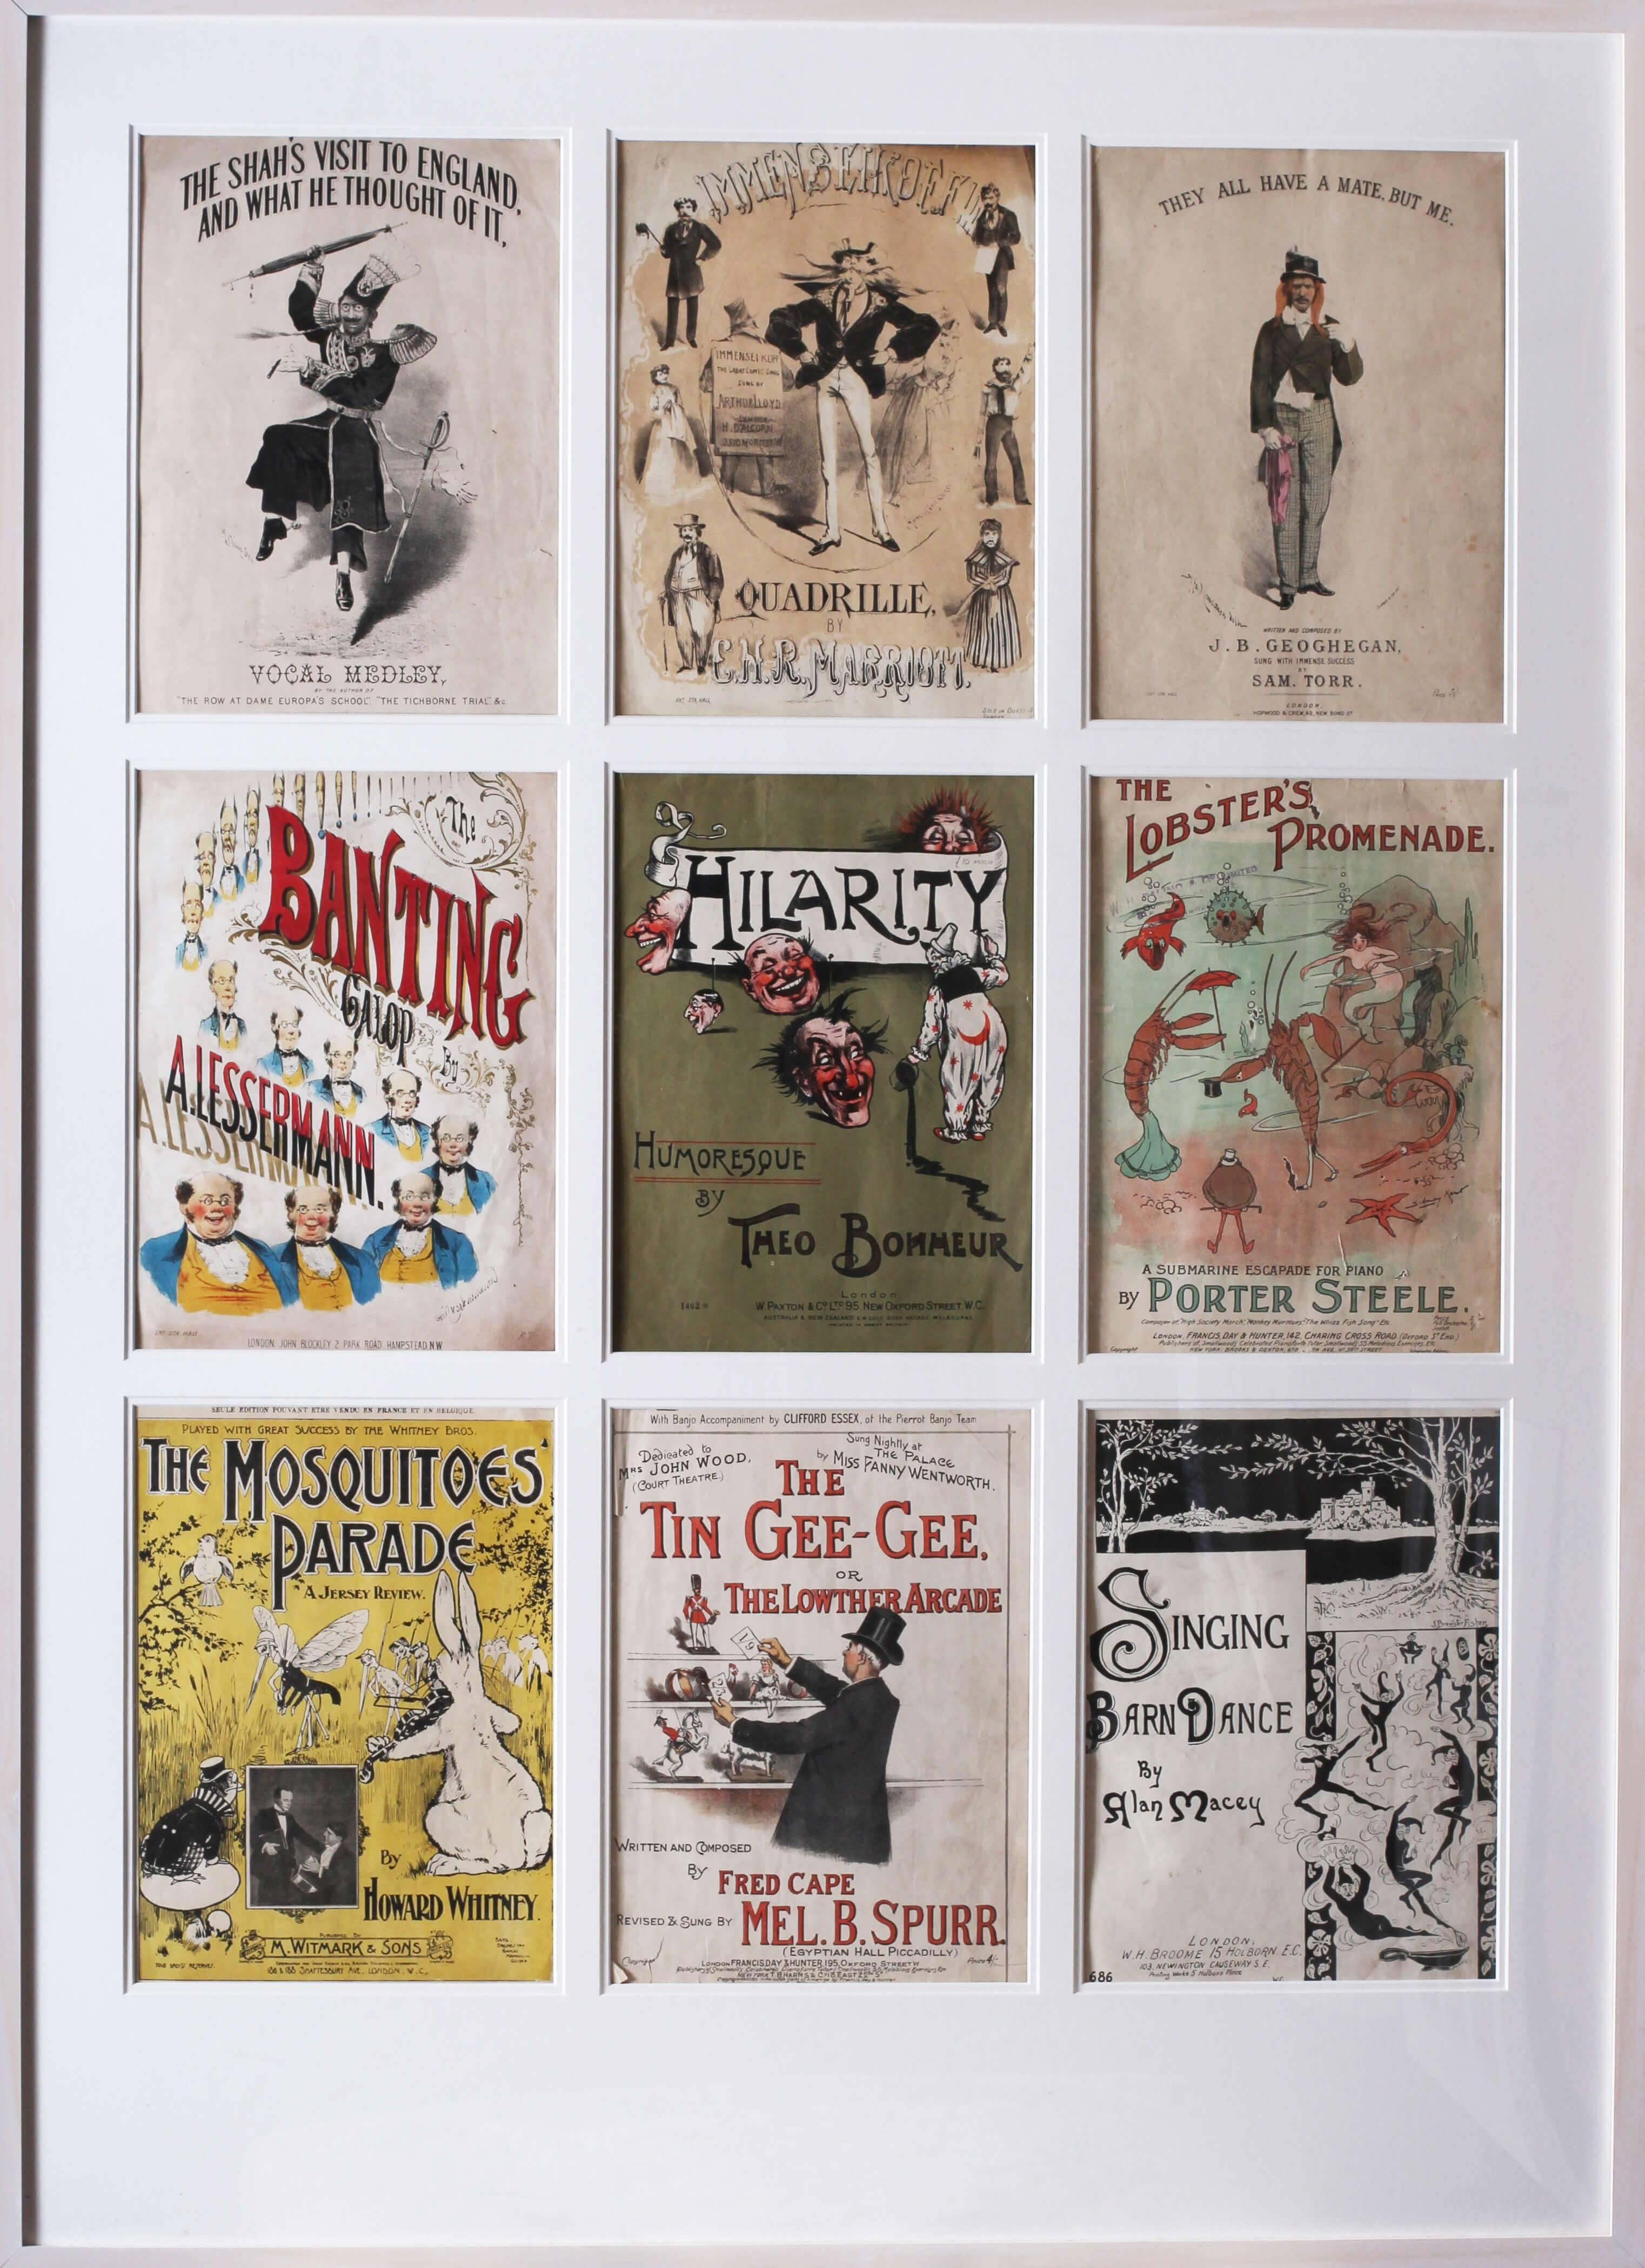 Original British sheet music covers from the early 19th Century